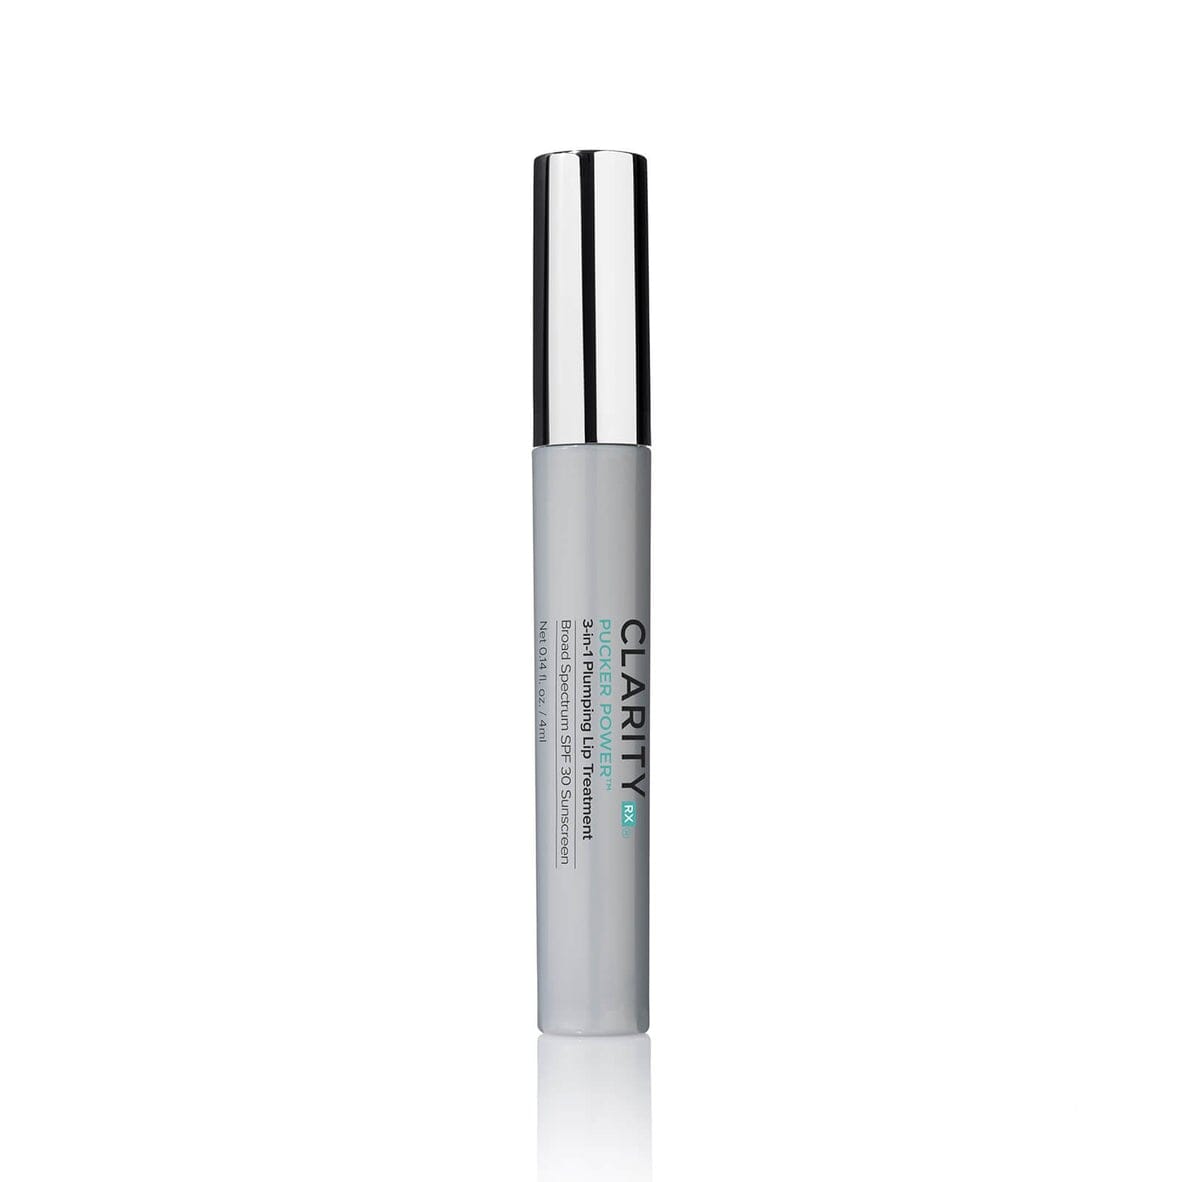 ClarityRx Pucker Power 3-in-1 Lip Treatment ClarityRx Shop at Exclusive Beauty Club